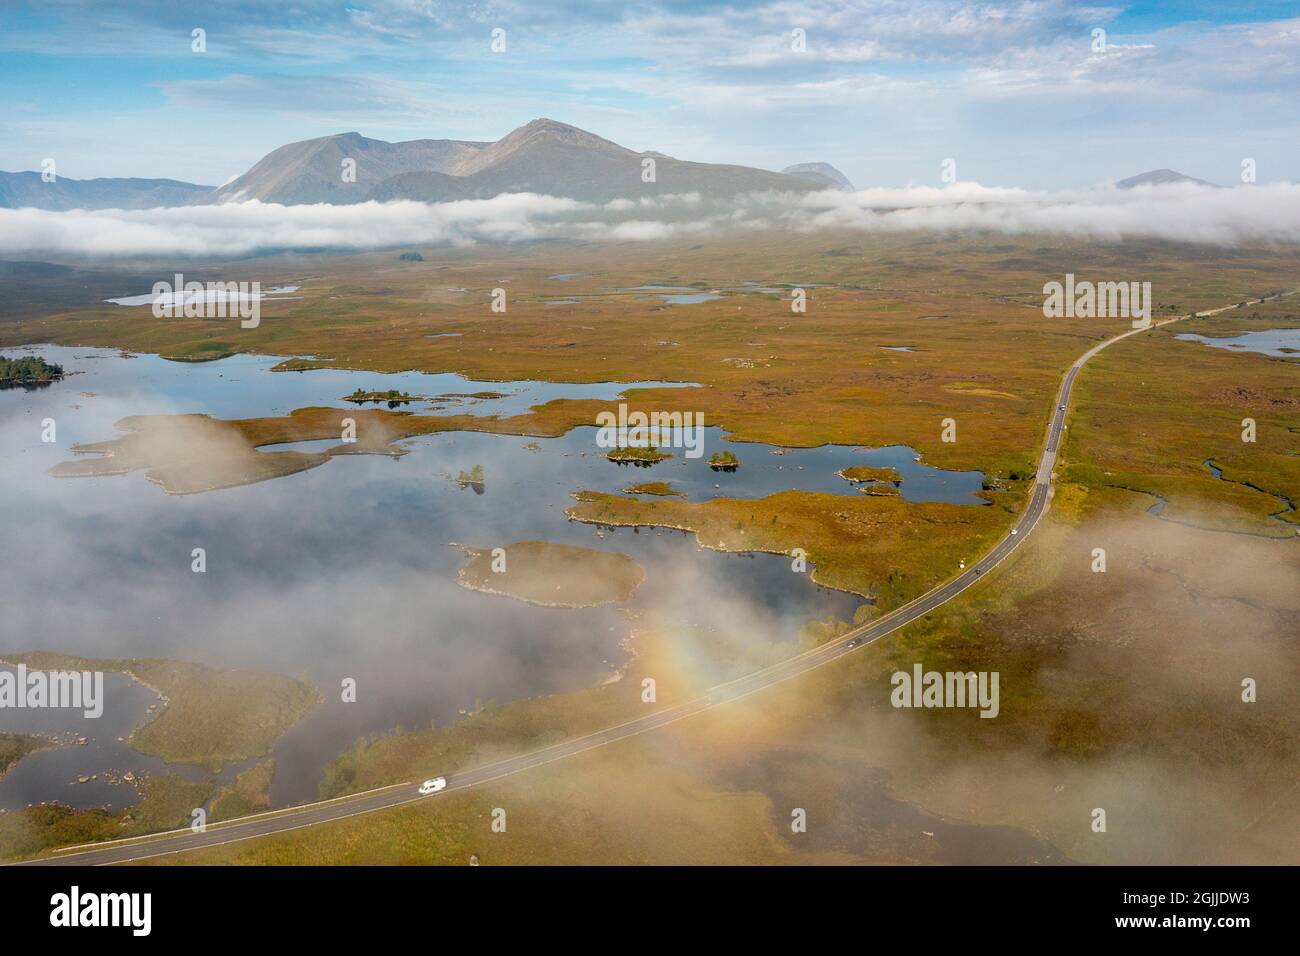 Early morning view of Rannoch Moor and A82 road  in the mist from drone, Scottish highlands, Scotland, UK Stock Photo